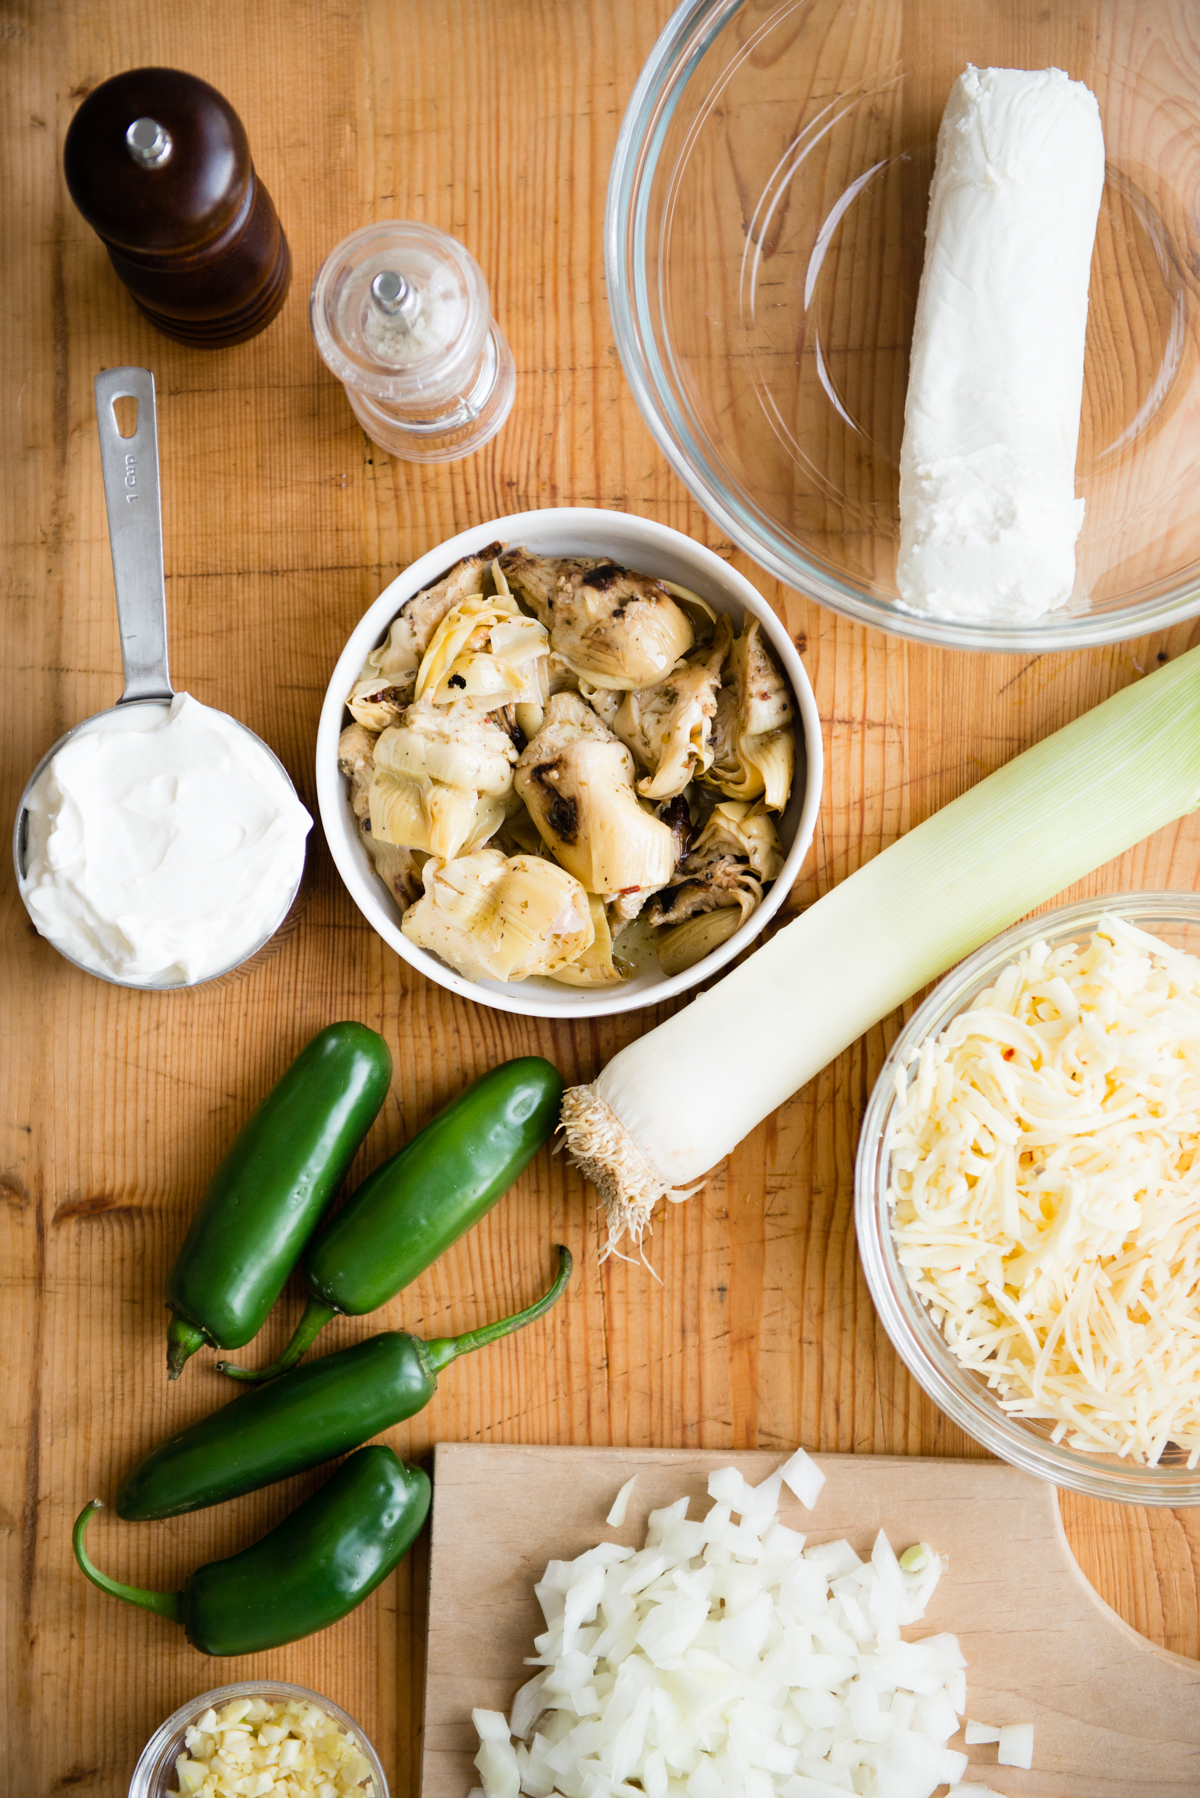 Ingredients for Spicy Jalapeño Artichoke Dip with Corn Chips | DesignMom.com